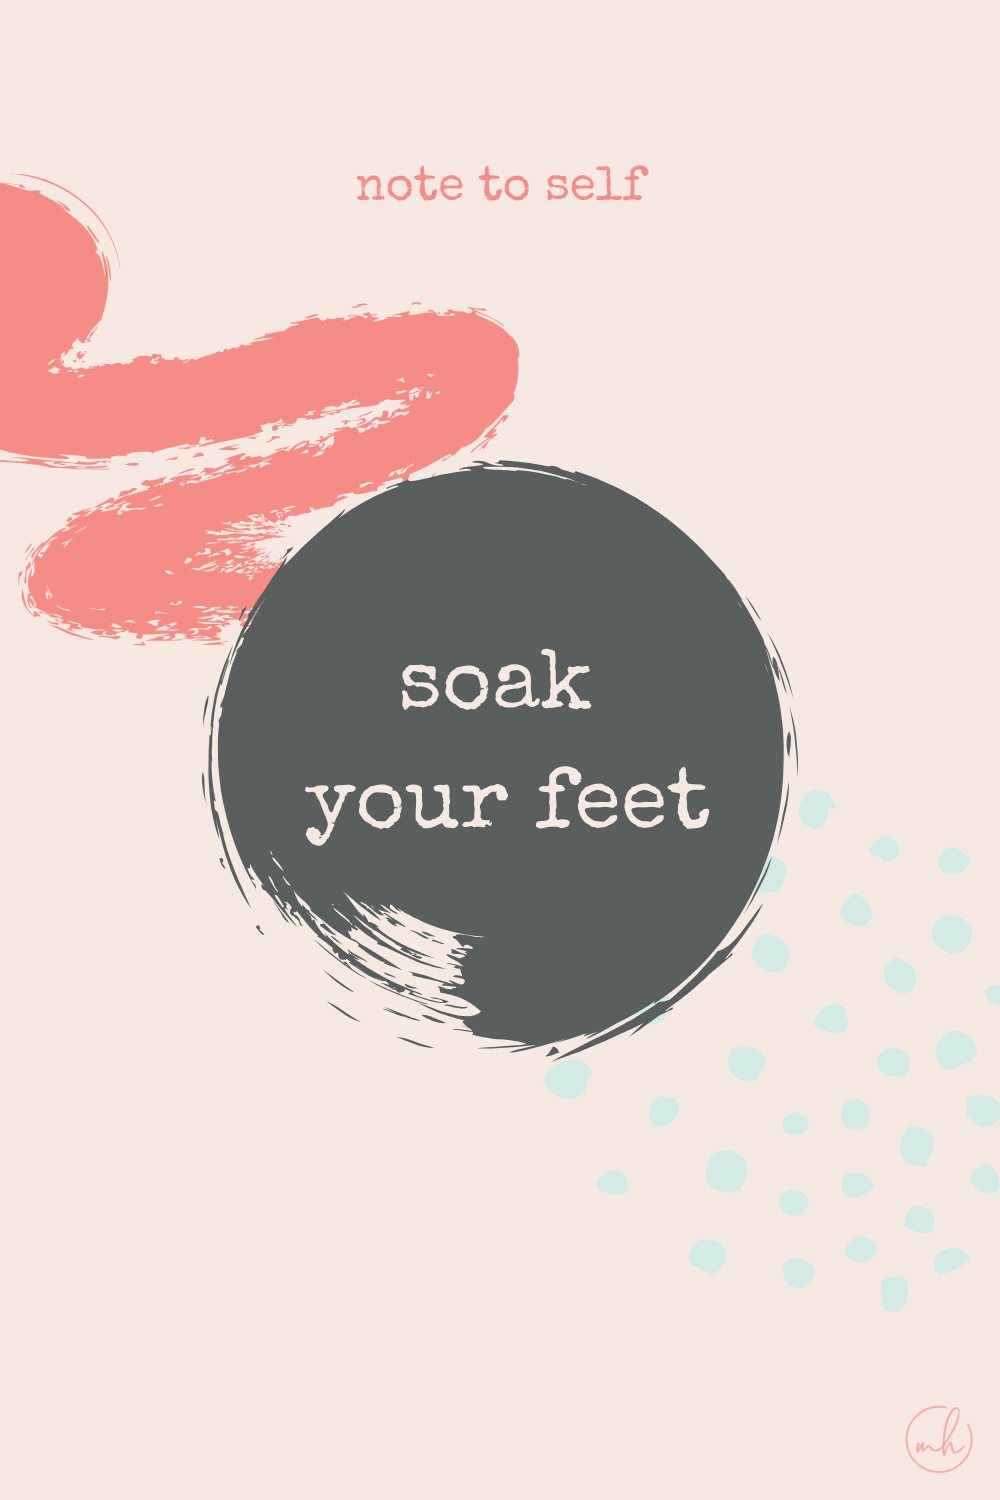 Soak your feet - Note to self quotes | myhoogah